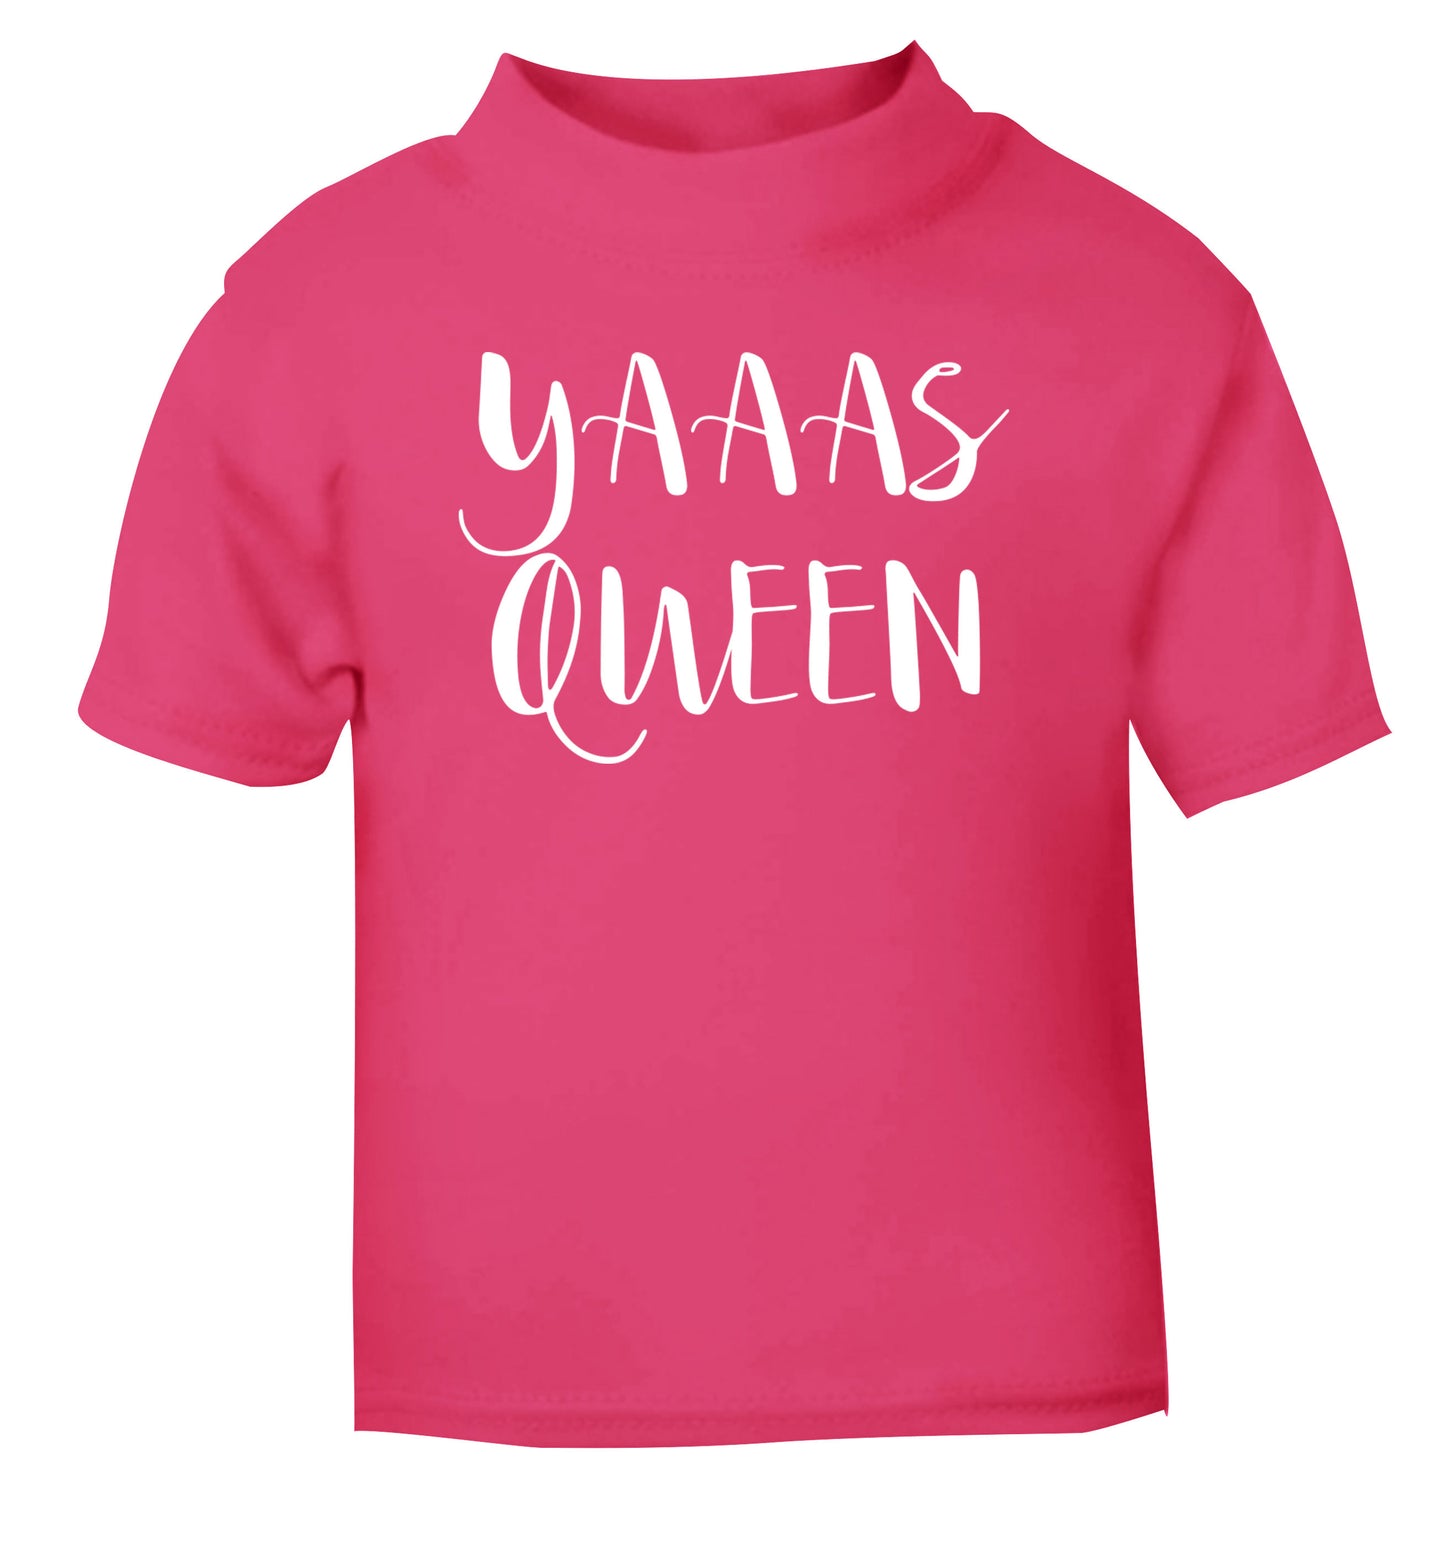 Yas Queen pink Baby Toddler Tshirt 2 Years